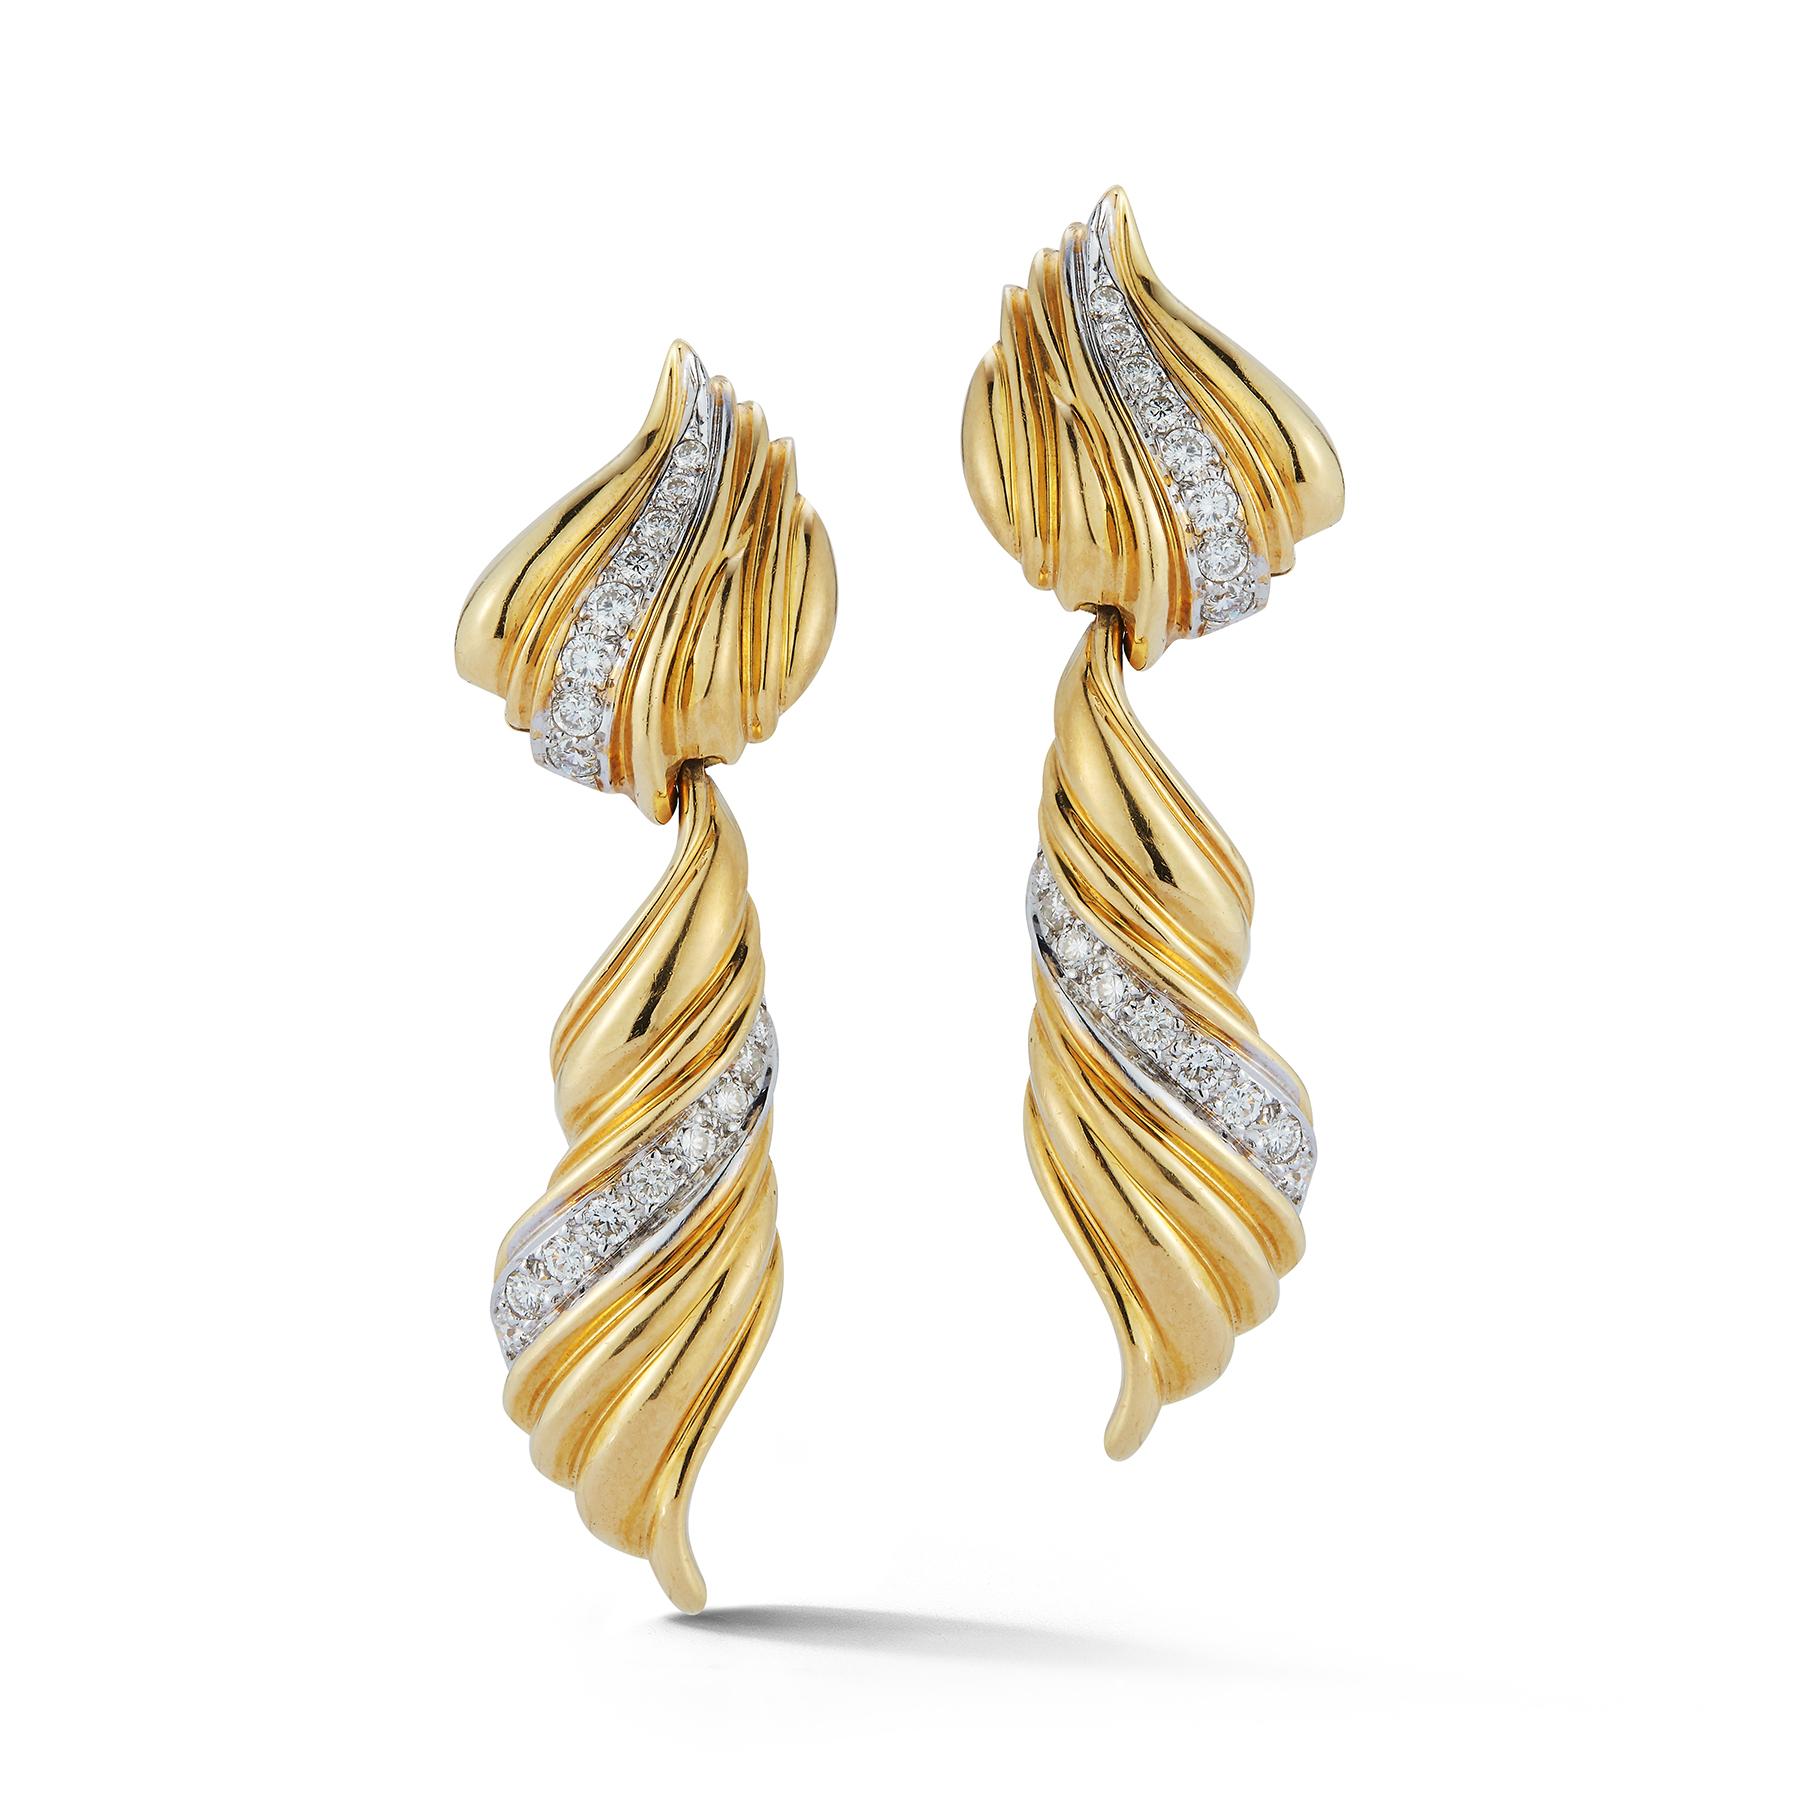 Gold & Diamond Earrings, round cut diamonds approximately 1.50 cts set in 18K yellow gold.
Measurements: 2